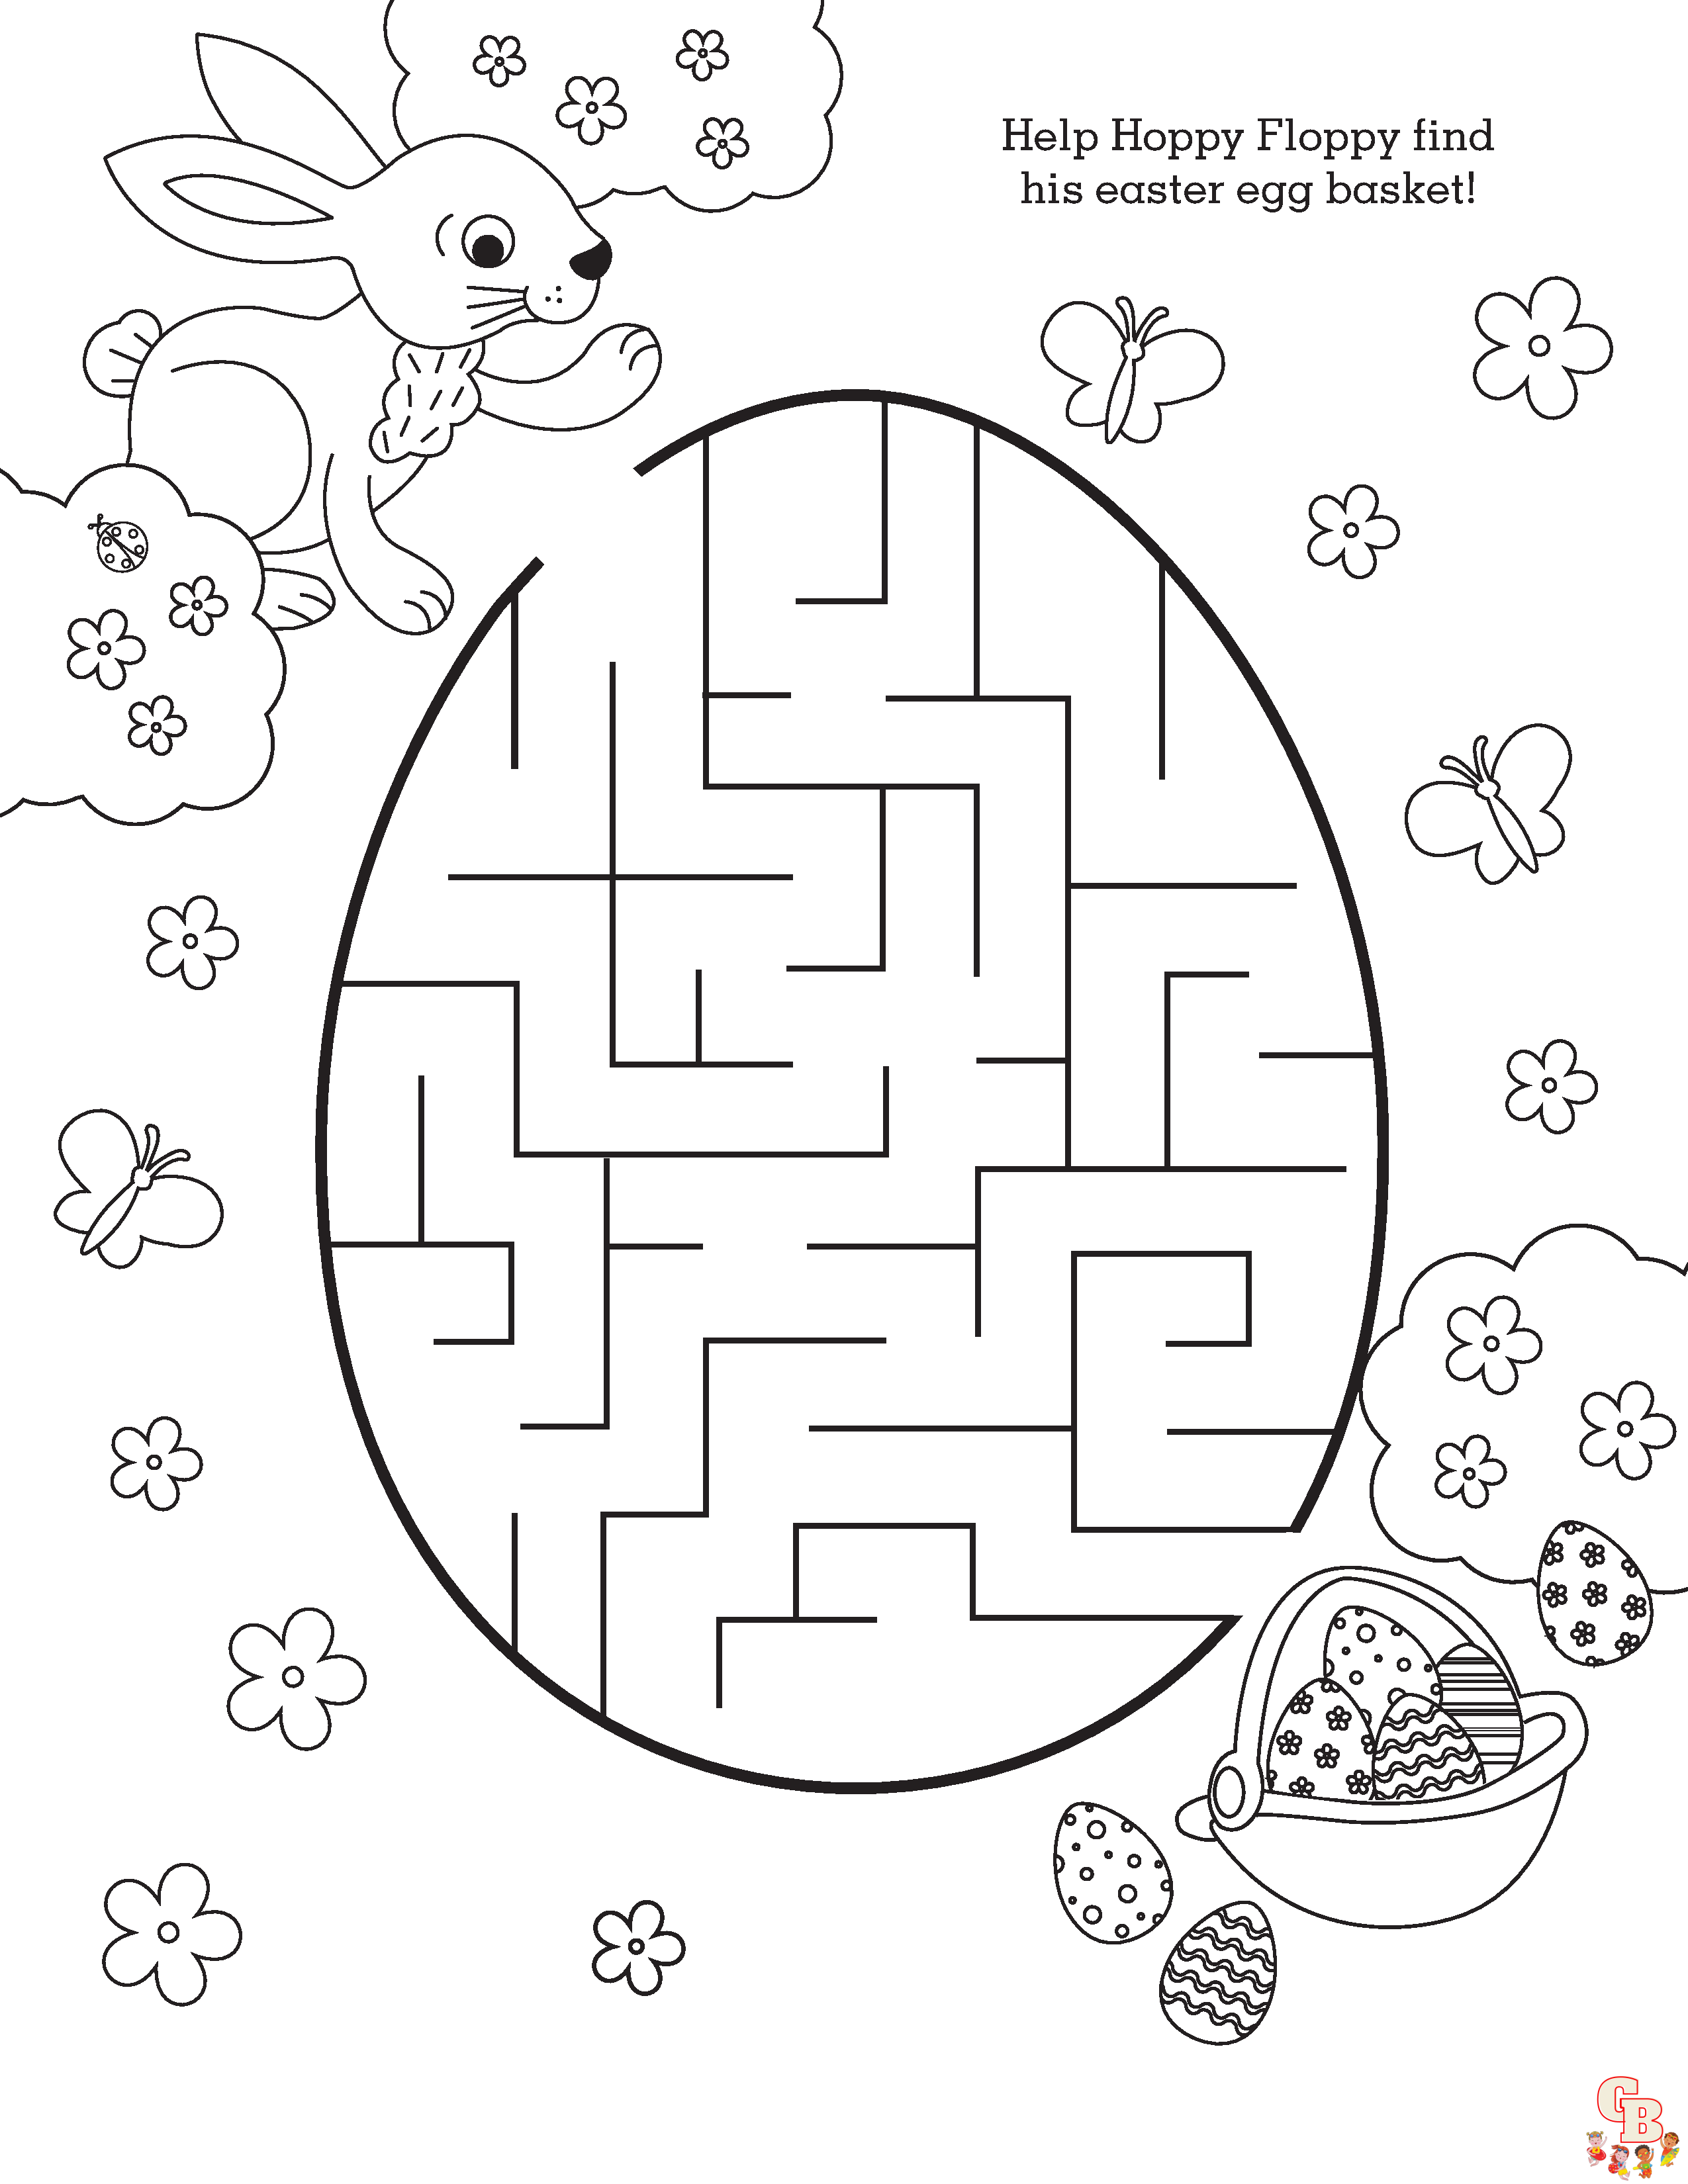 coloriage labyrinthes